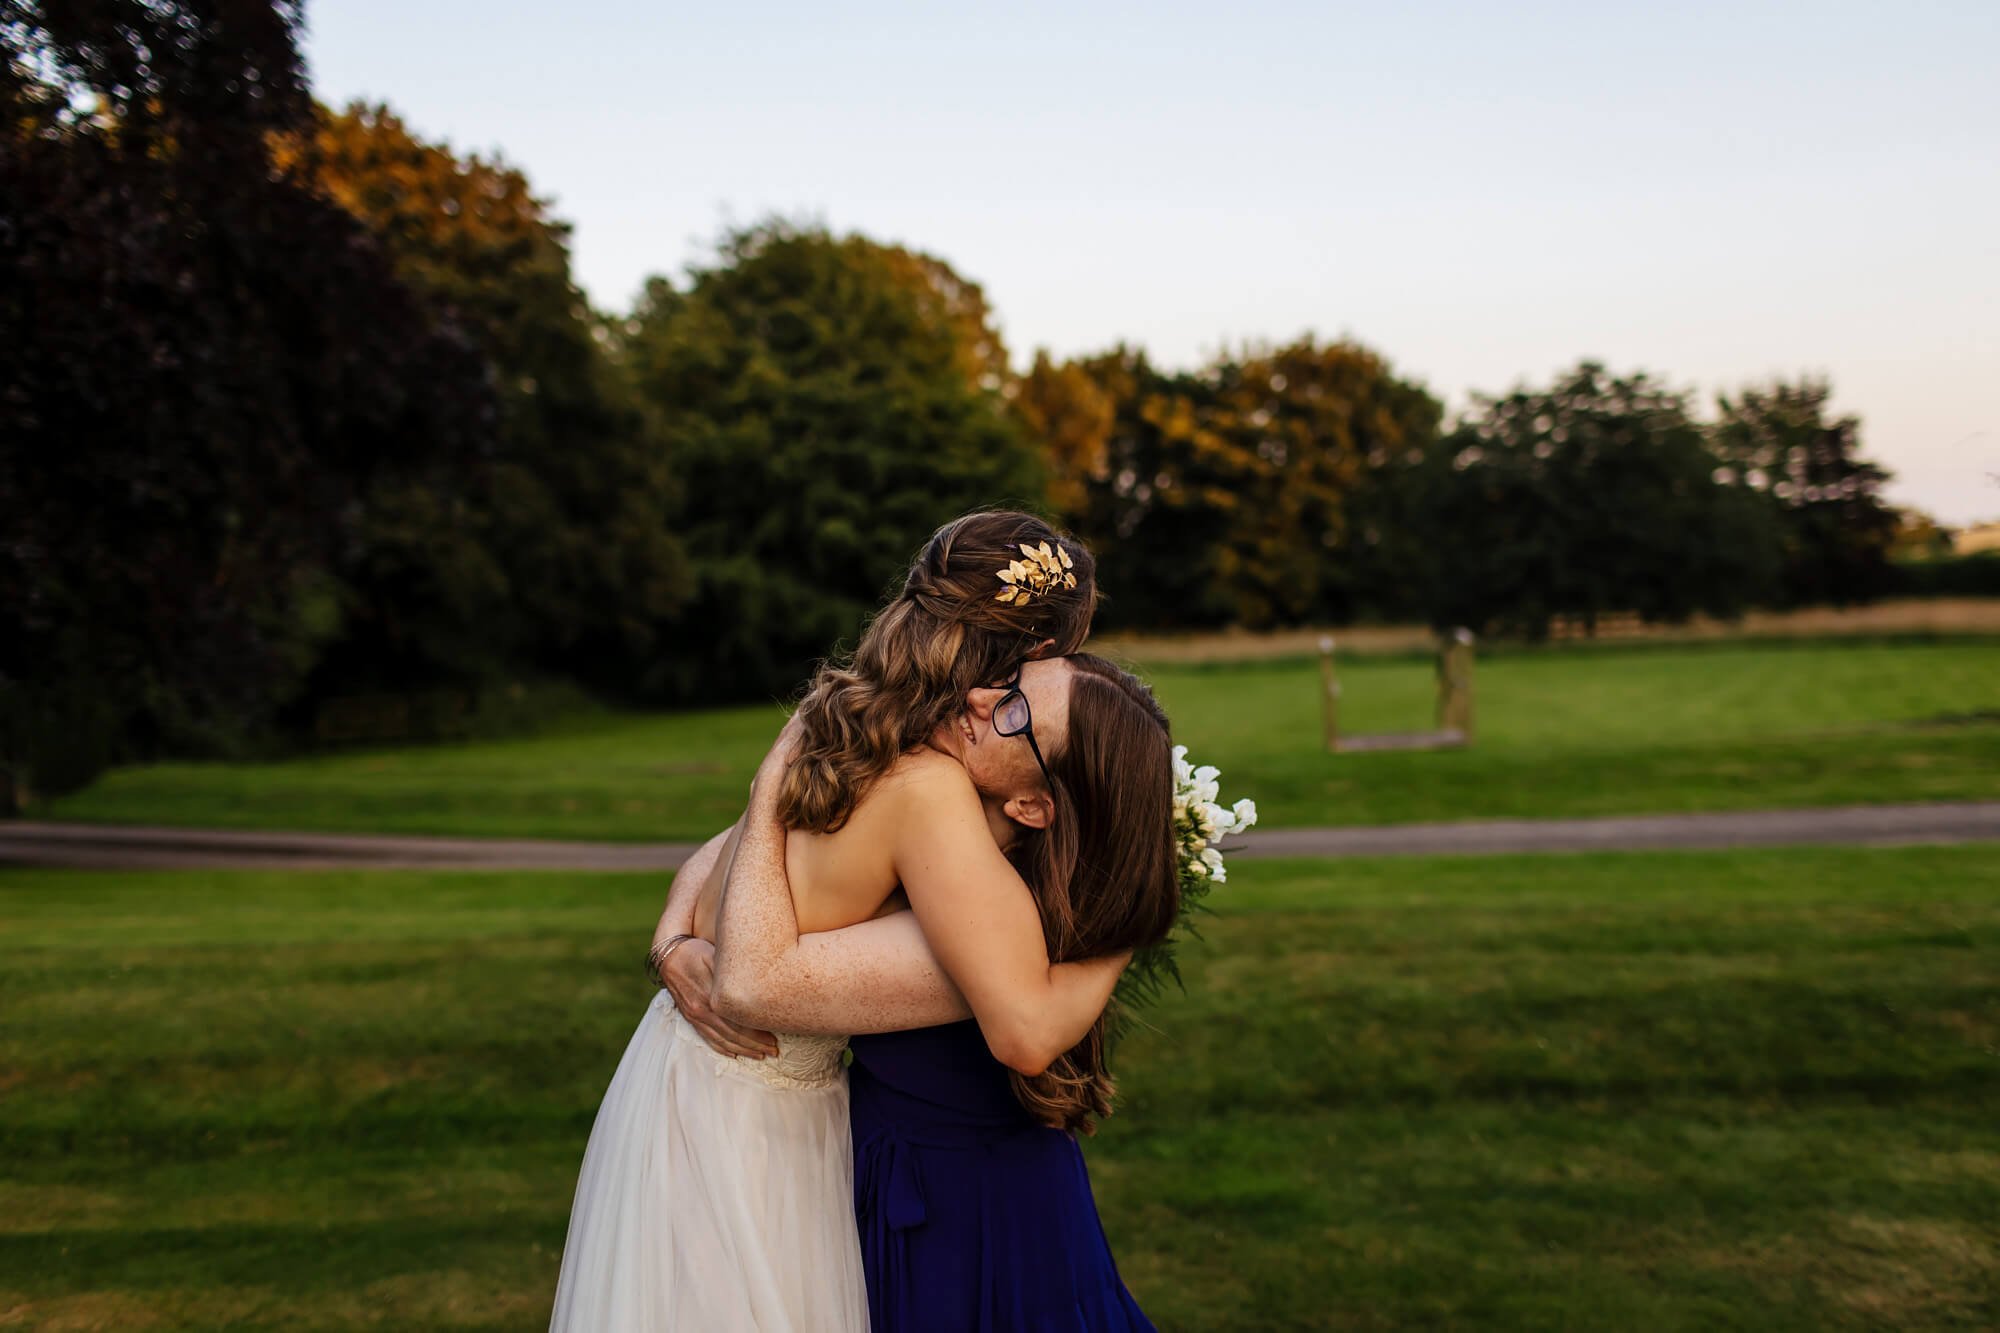 Bride and friend hug in the evening sunshine at a wedding